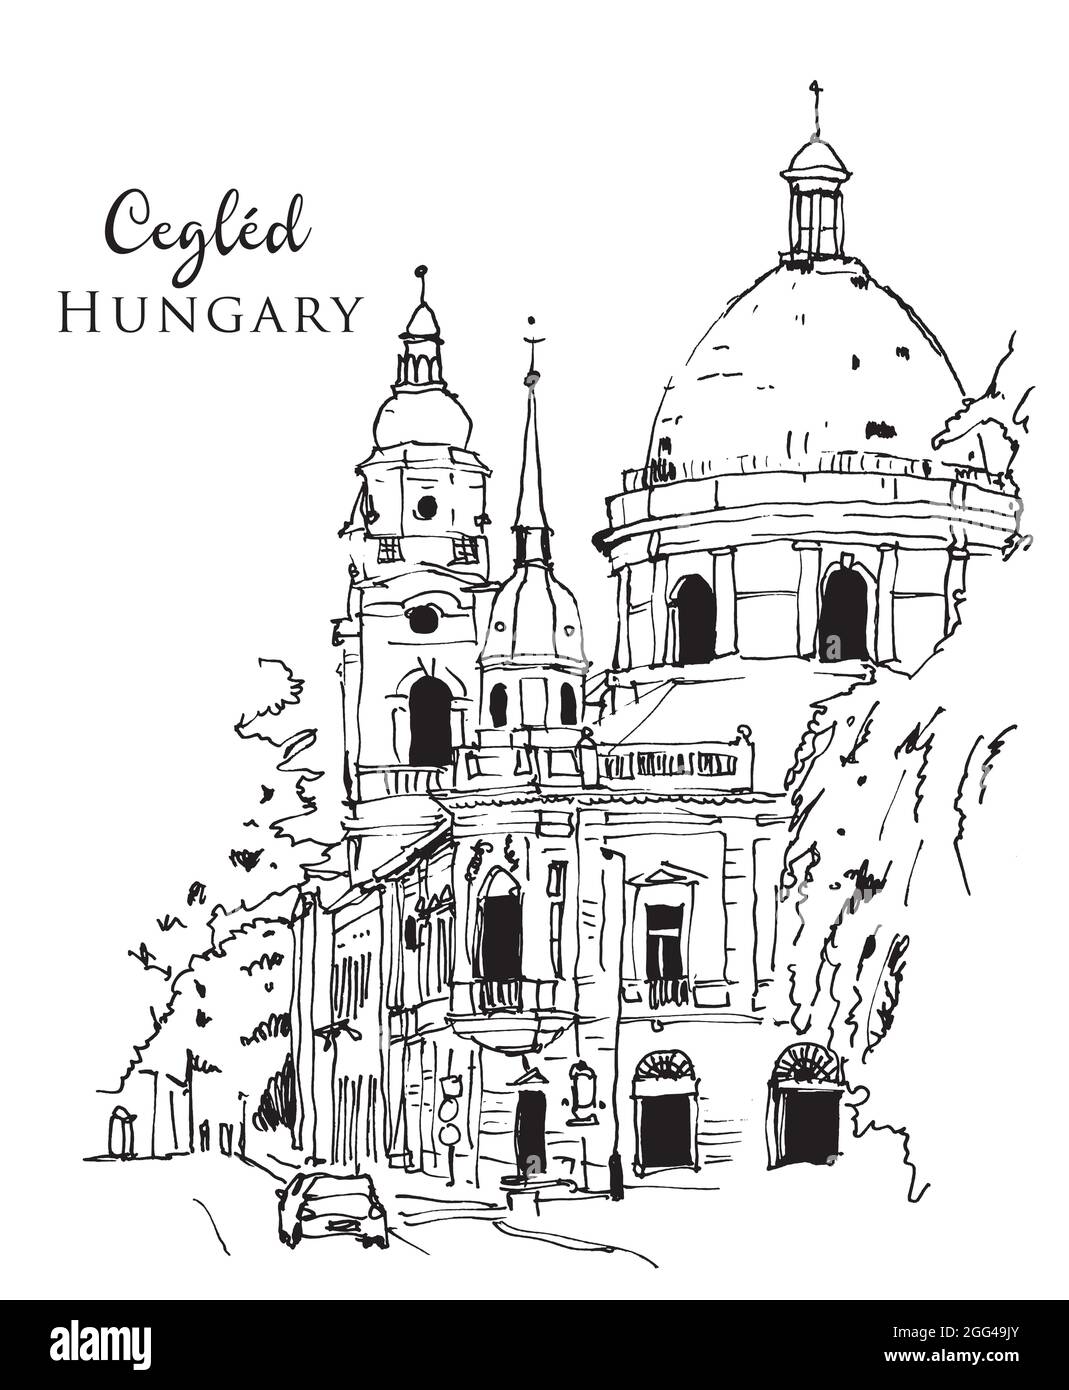 Vector hand drawn sketch illustration of the Calvinist Church of Cegled, Hungary Stock Vector